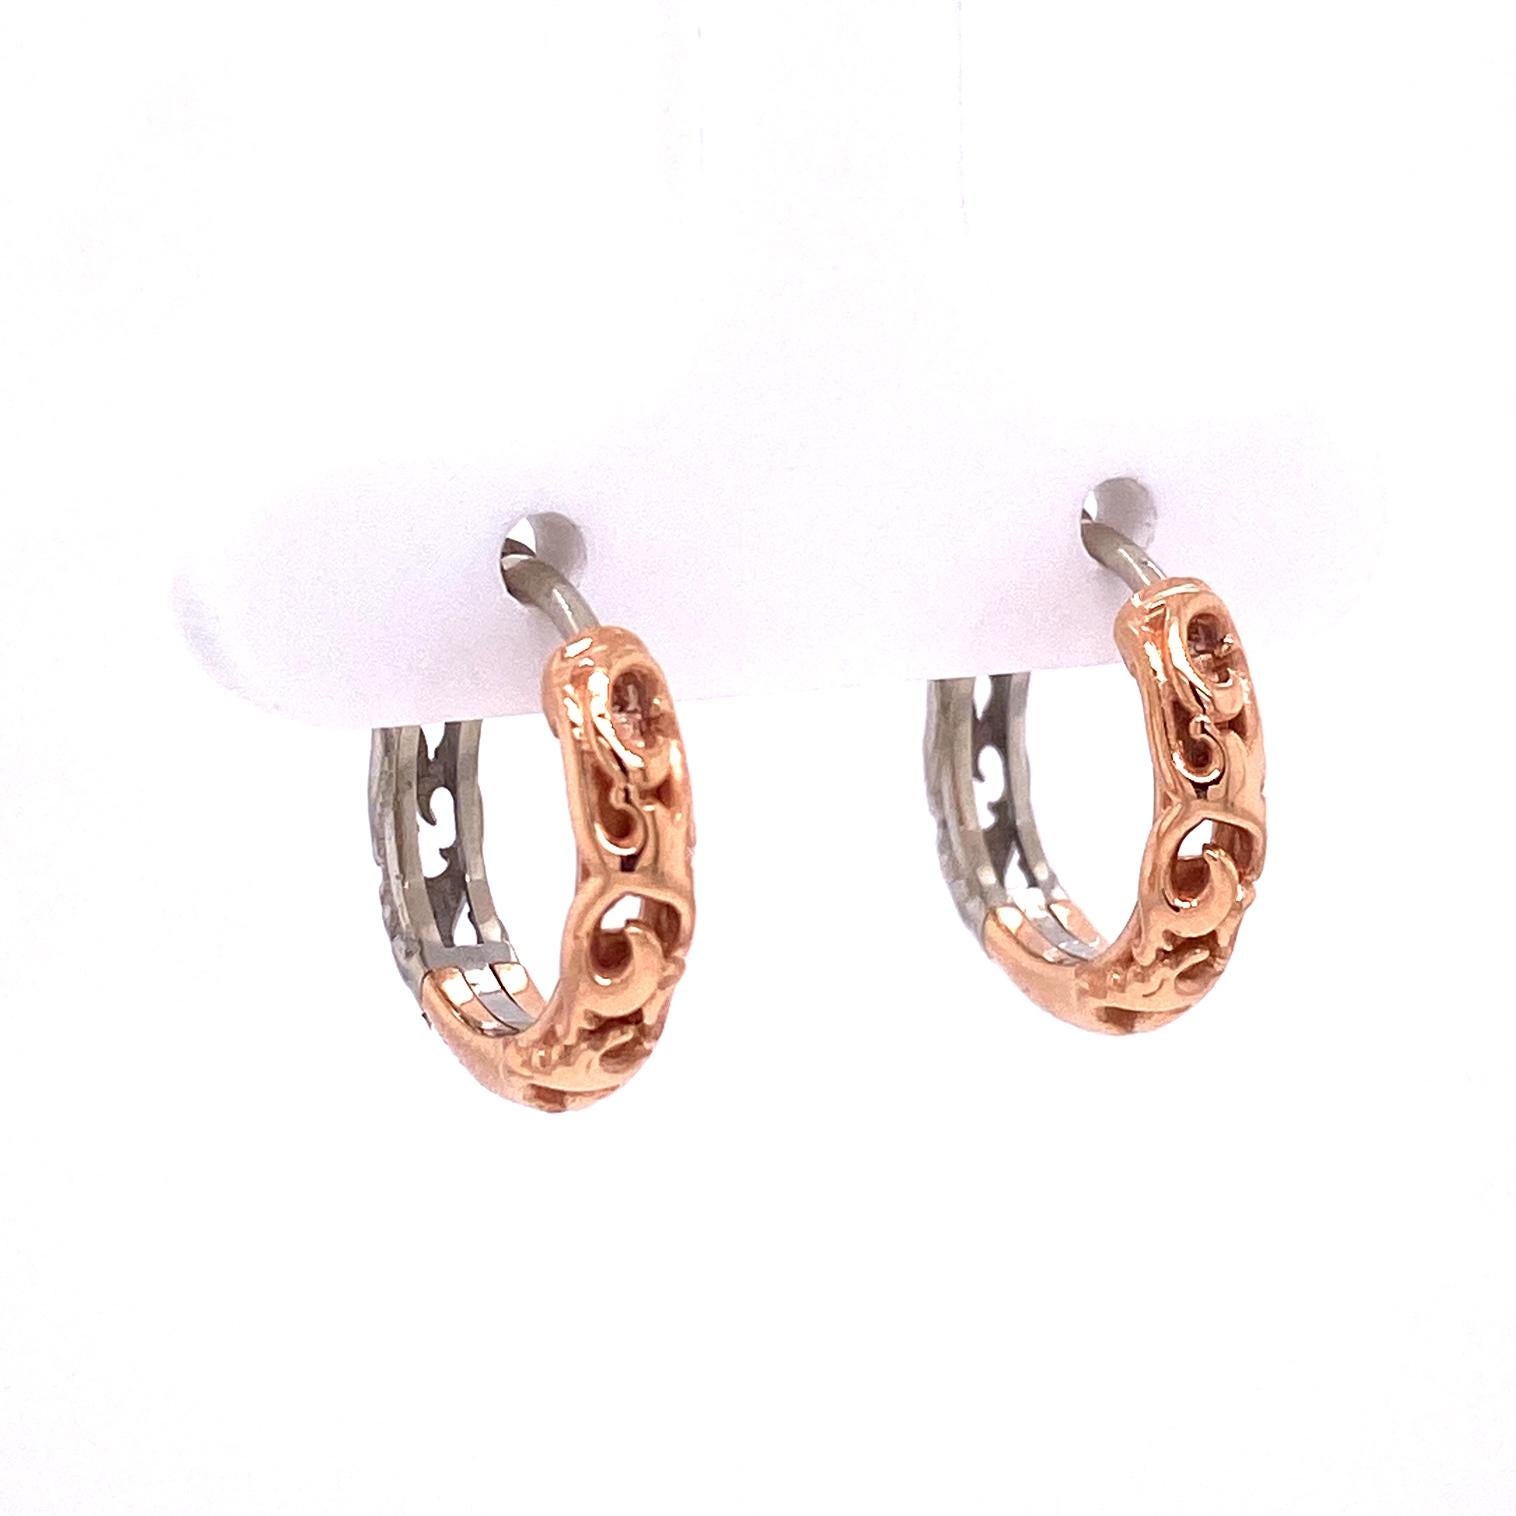 Contemporary 18k Rose and White Gold Scroll Pattern Hoops with Rose Quartz Earring Jackets